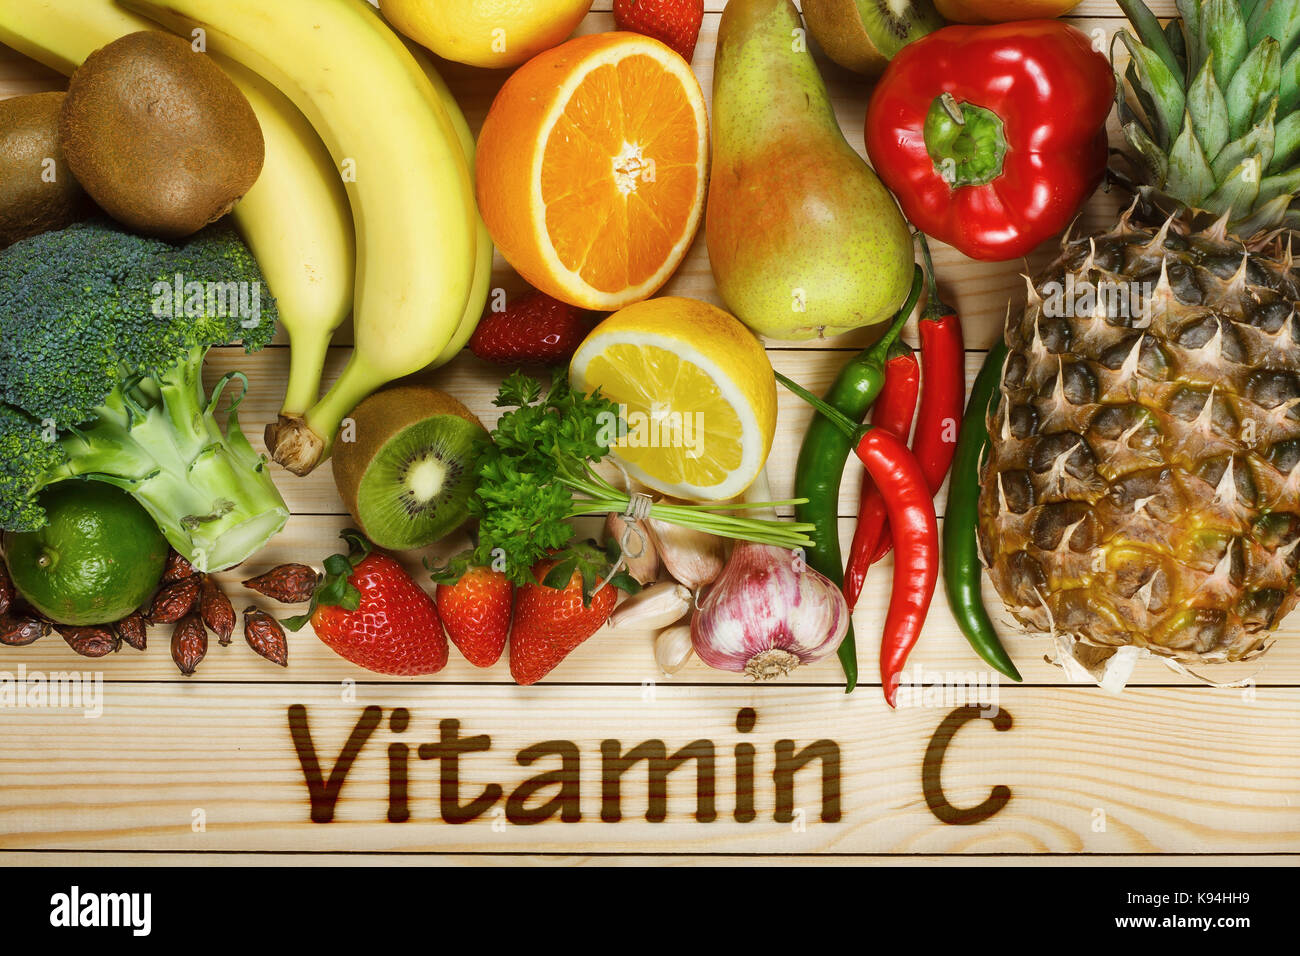 Vitamin C in fruits and vegetables. Natural products rich in vitamin C as oranges, lemons, dried fruits rose, red pepper, kiwi, parsley leaves, garlic Stock Photo